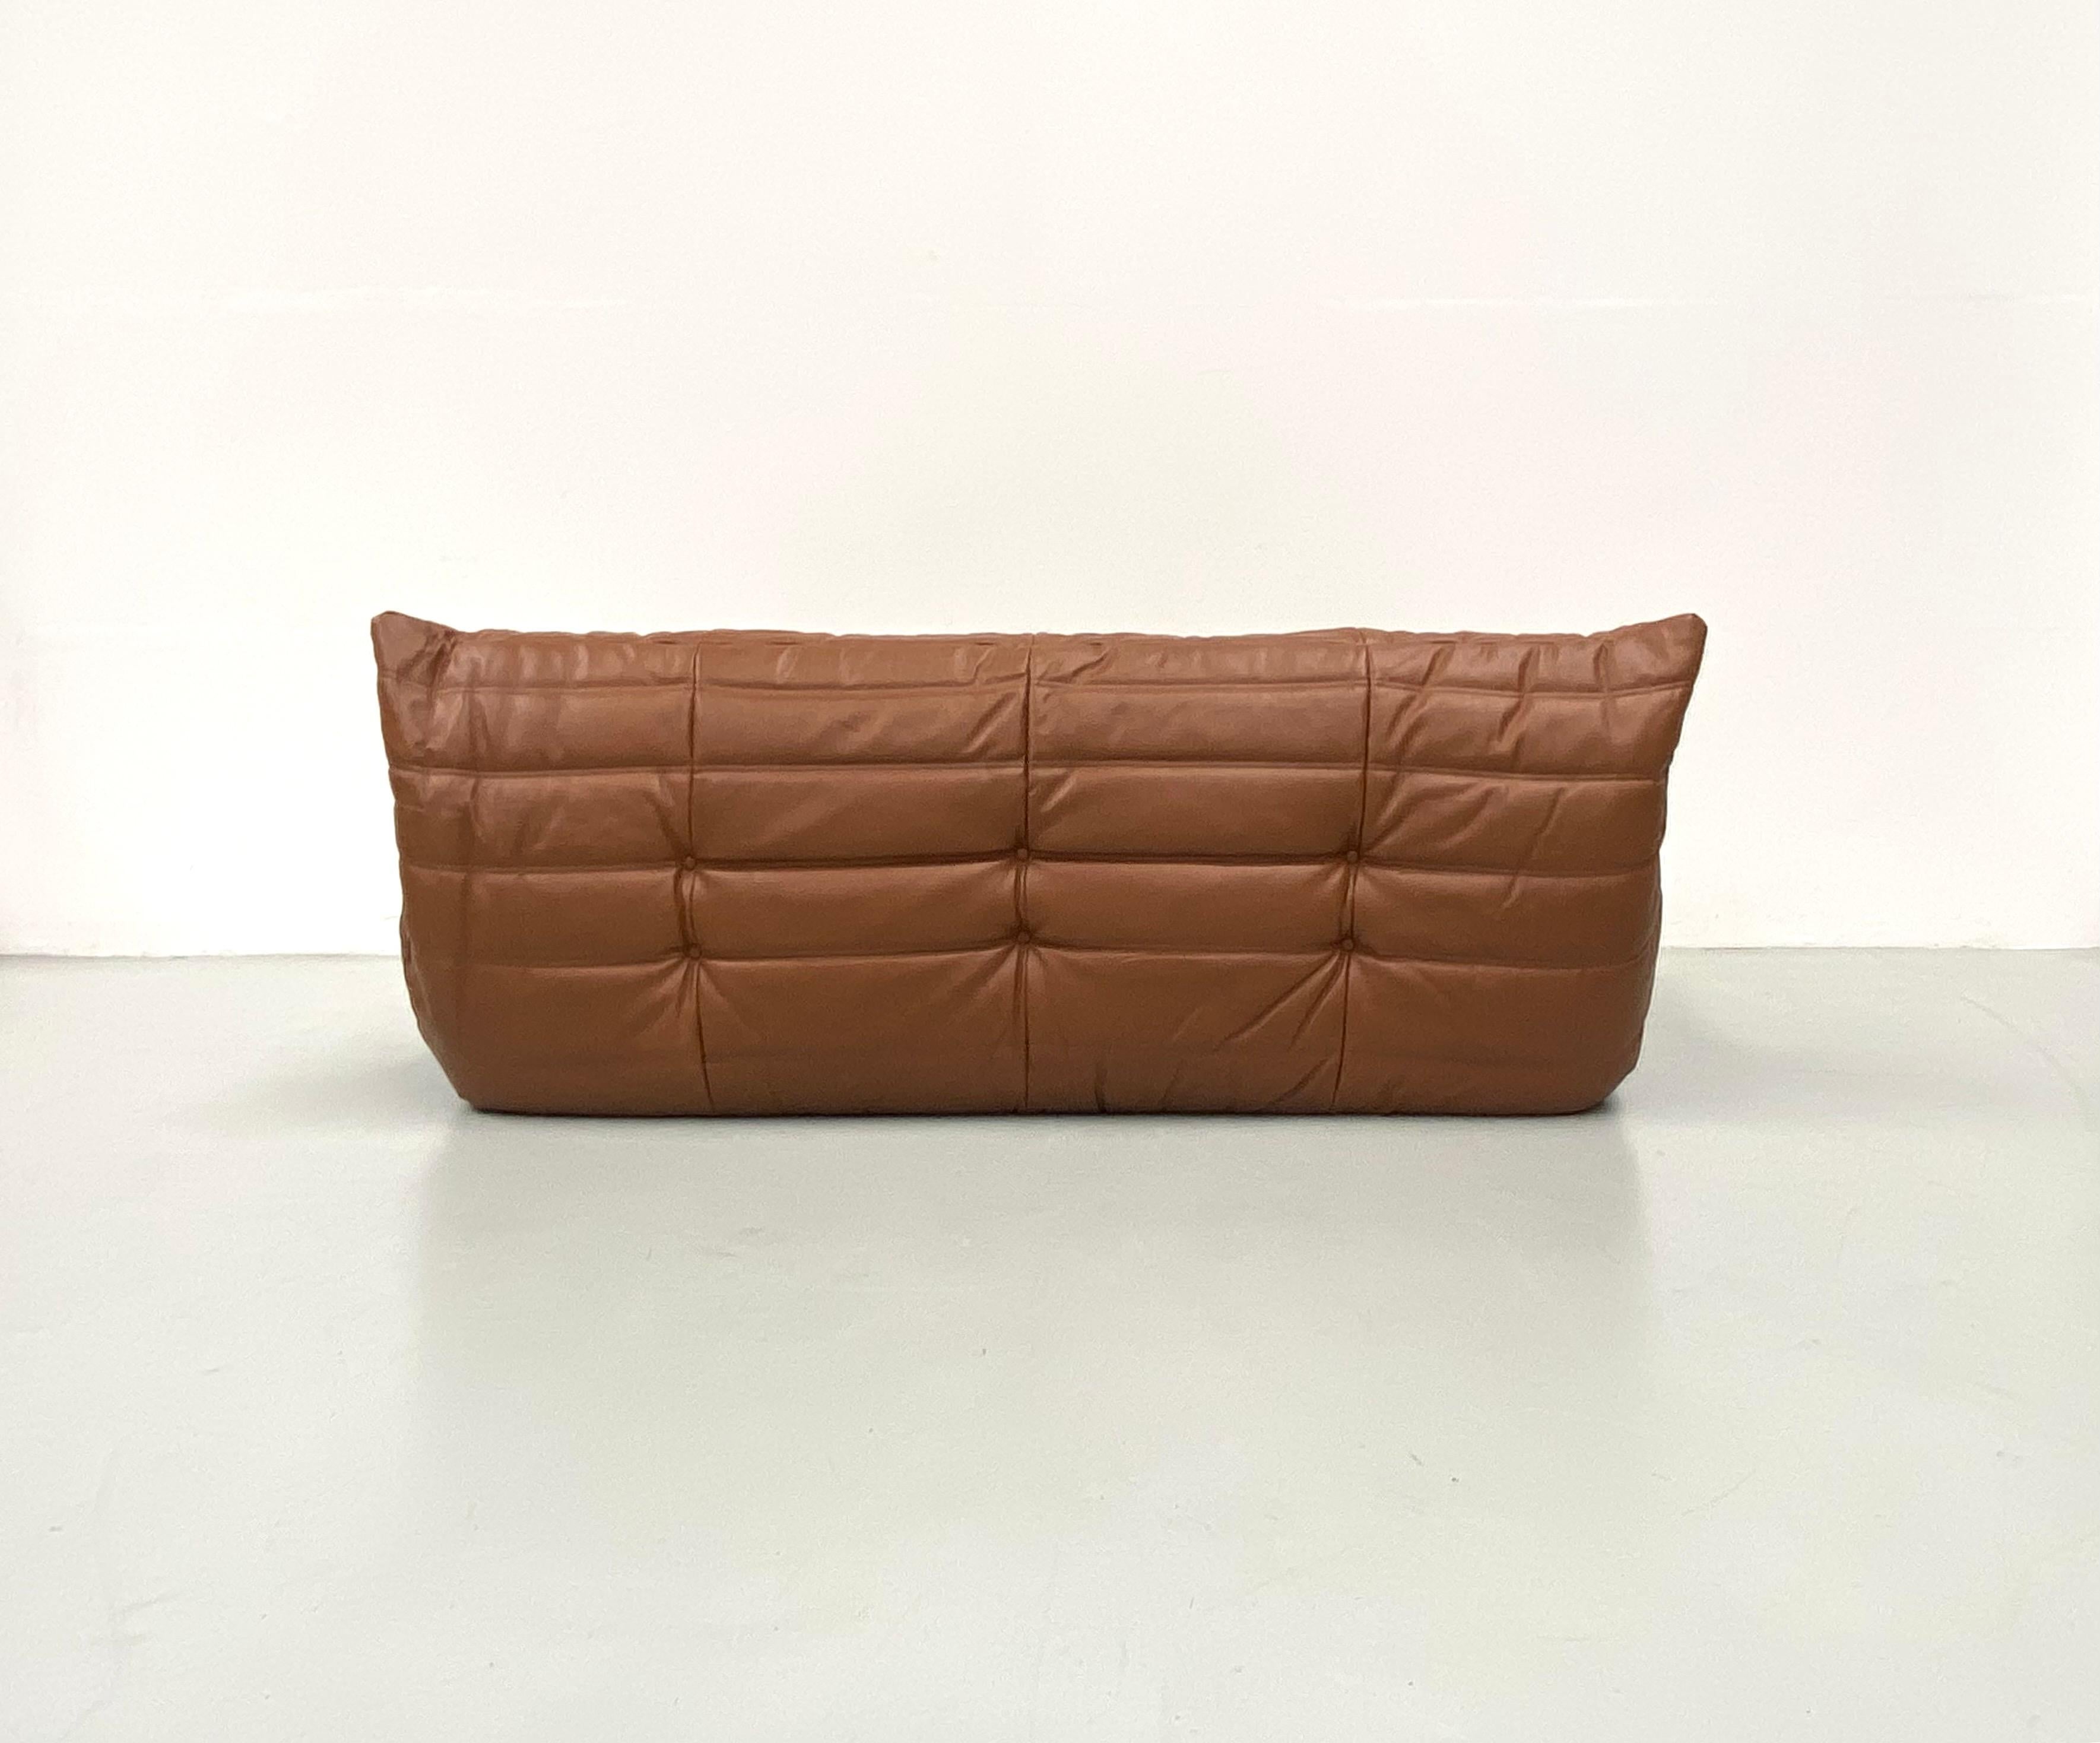 French Vintage Togo Sofa in Dark Cognac Leather by M. Ducaroy for Ligne Roset, 1970s